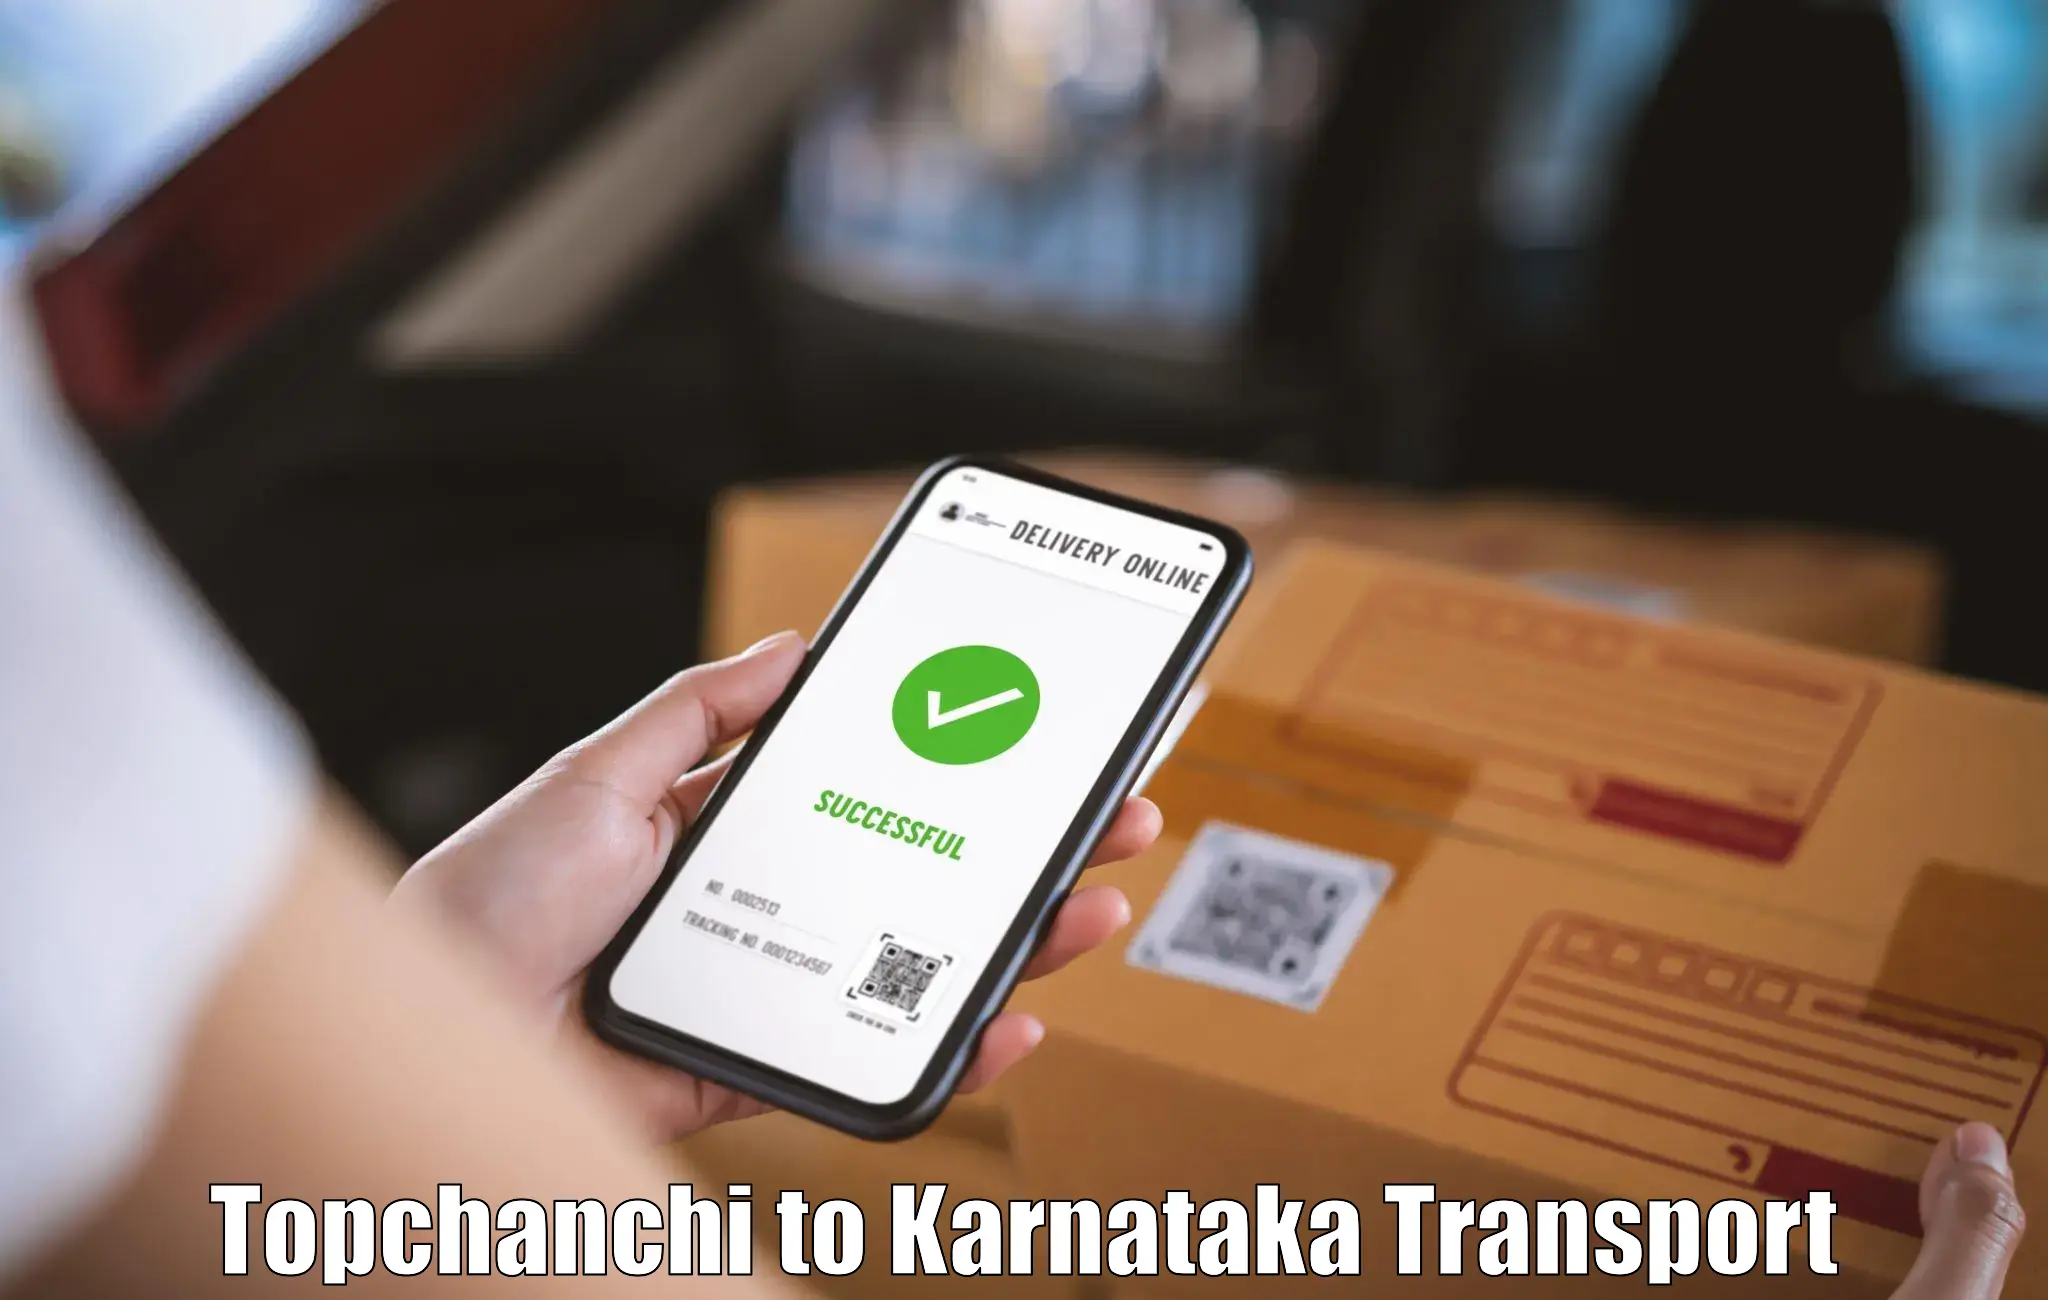 Commercial transport service Topchanchi to Davangere